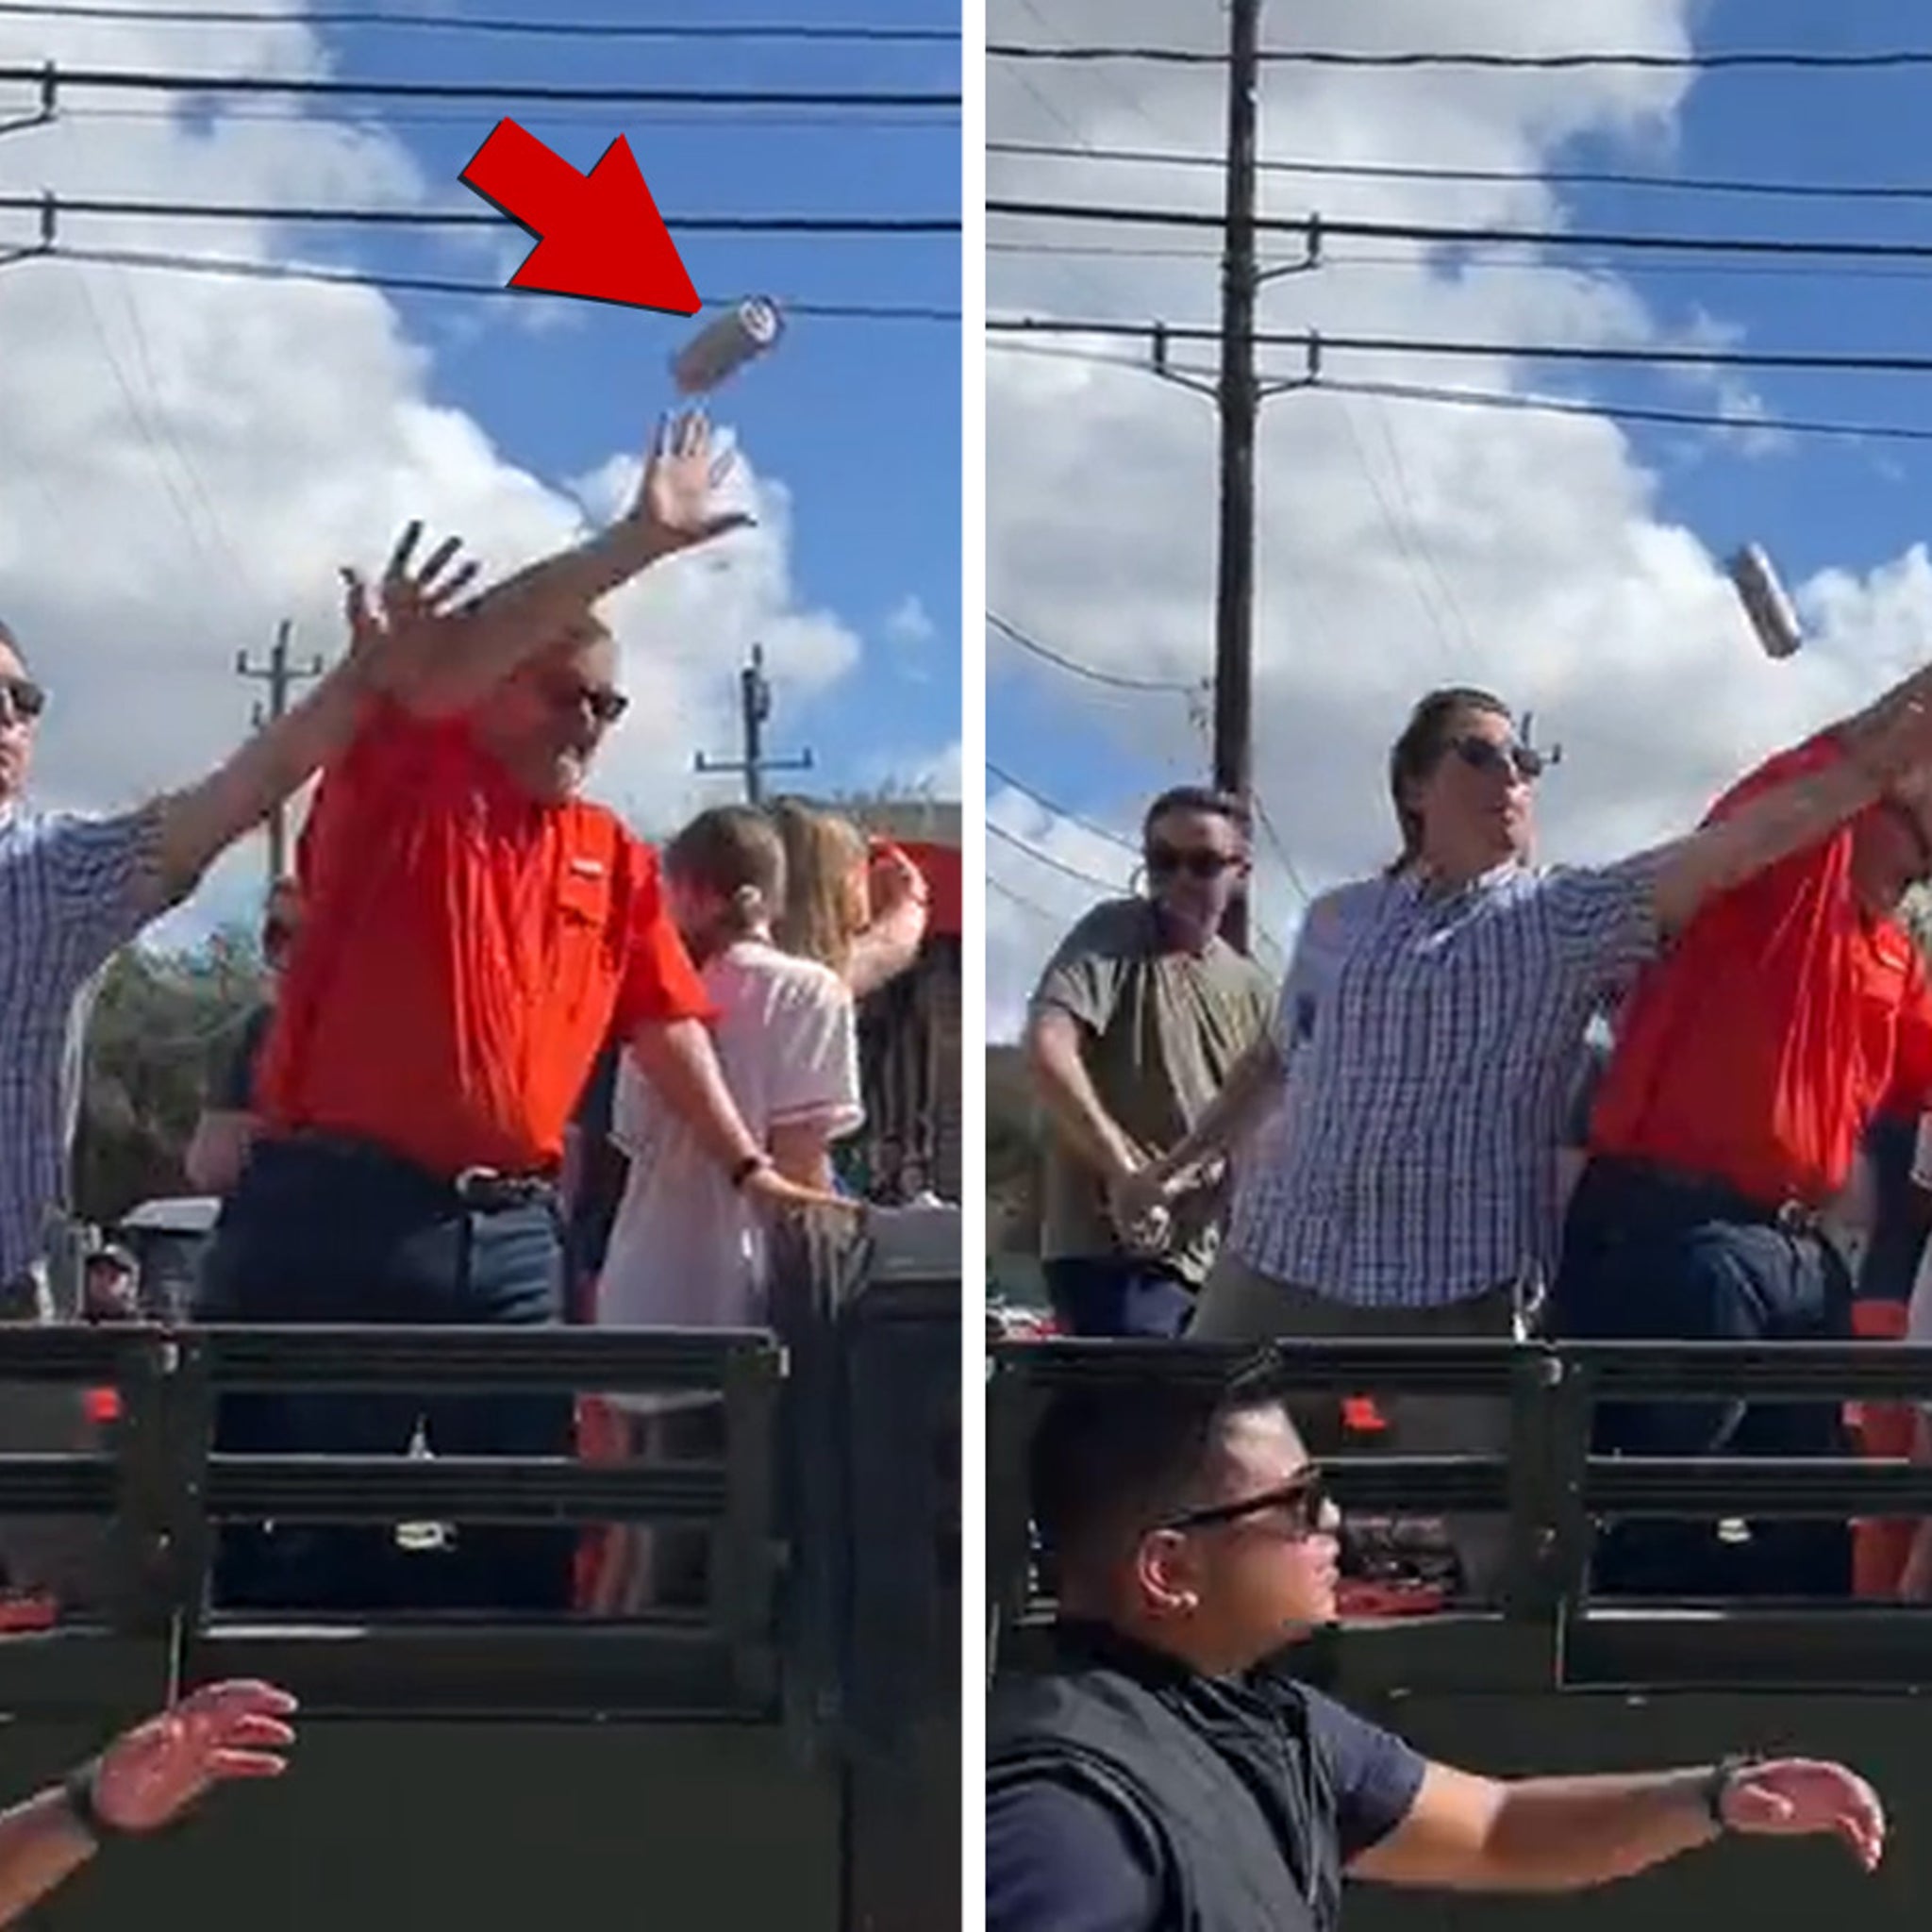 Senator Ted Cruz Hit By Beer Can At Astros World Series Parade, Man Arrested